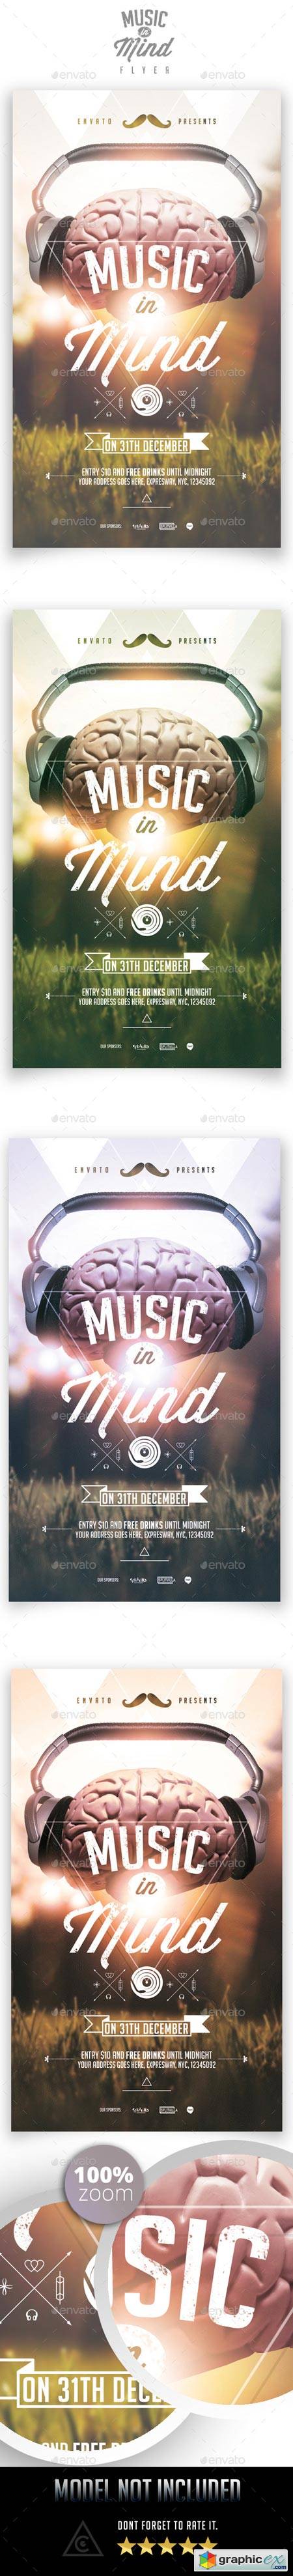 Music in Mind Flyer Template 9020350